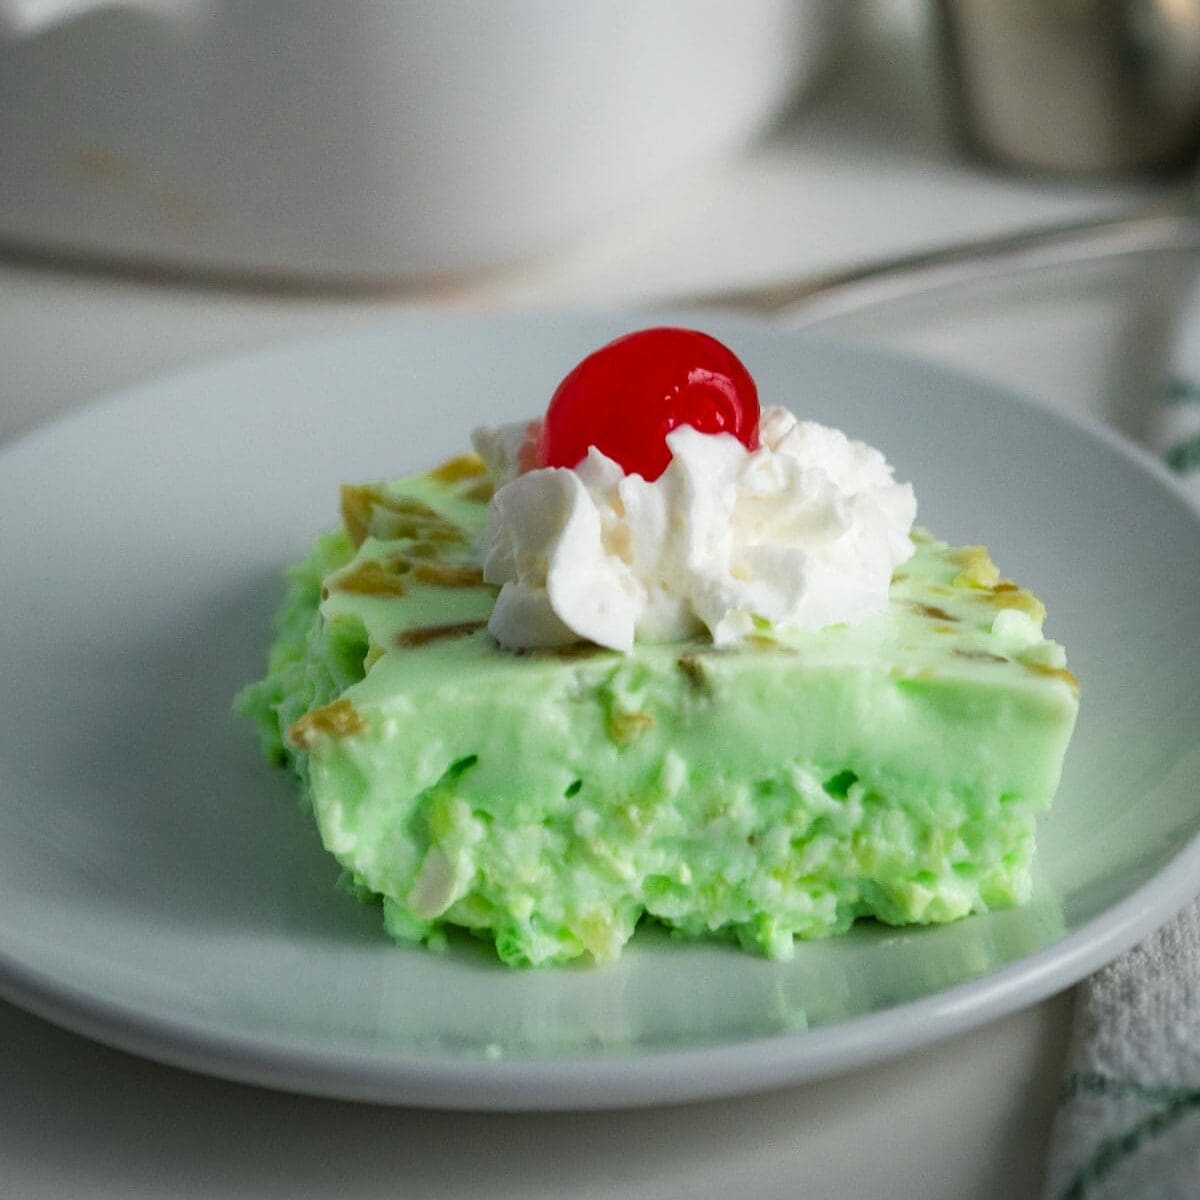 green jello salad topped with whipped cream and a cherry.